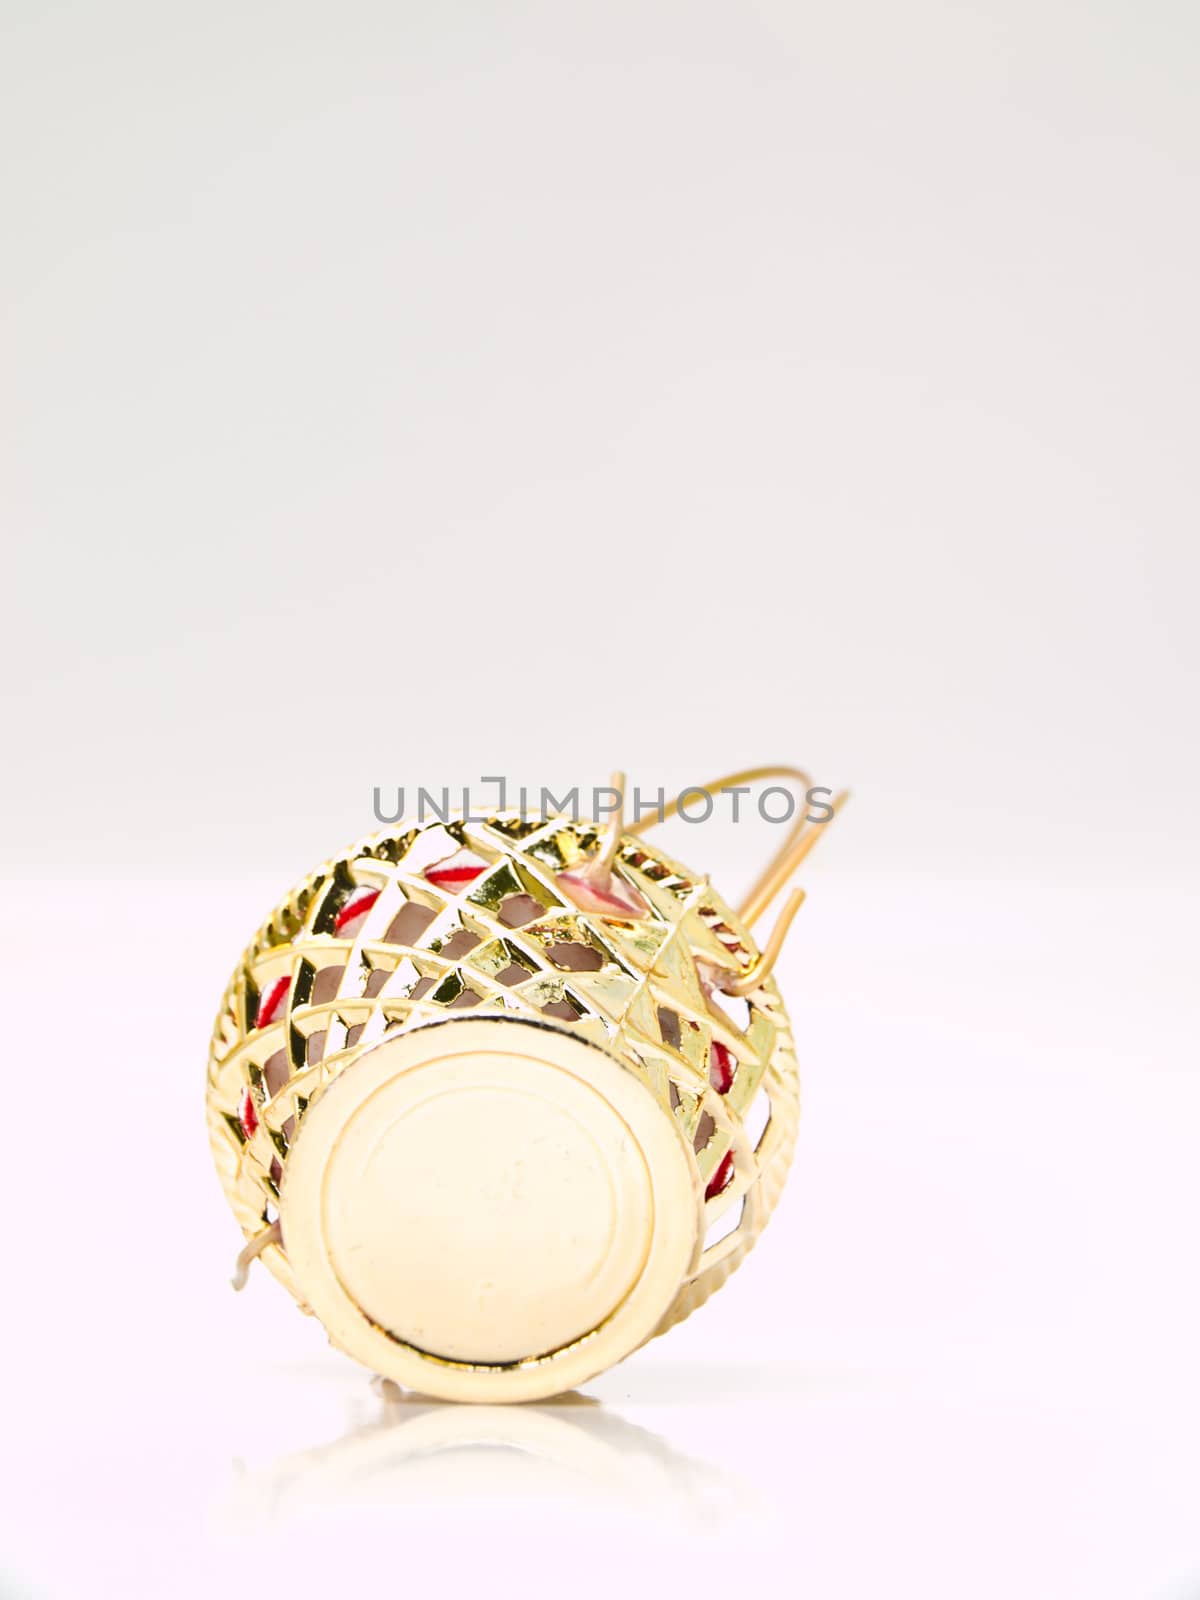 A miniature metalic wicker isolated on white background